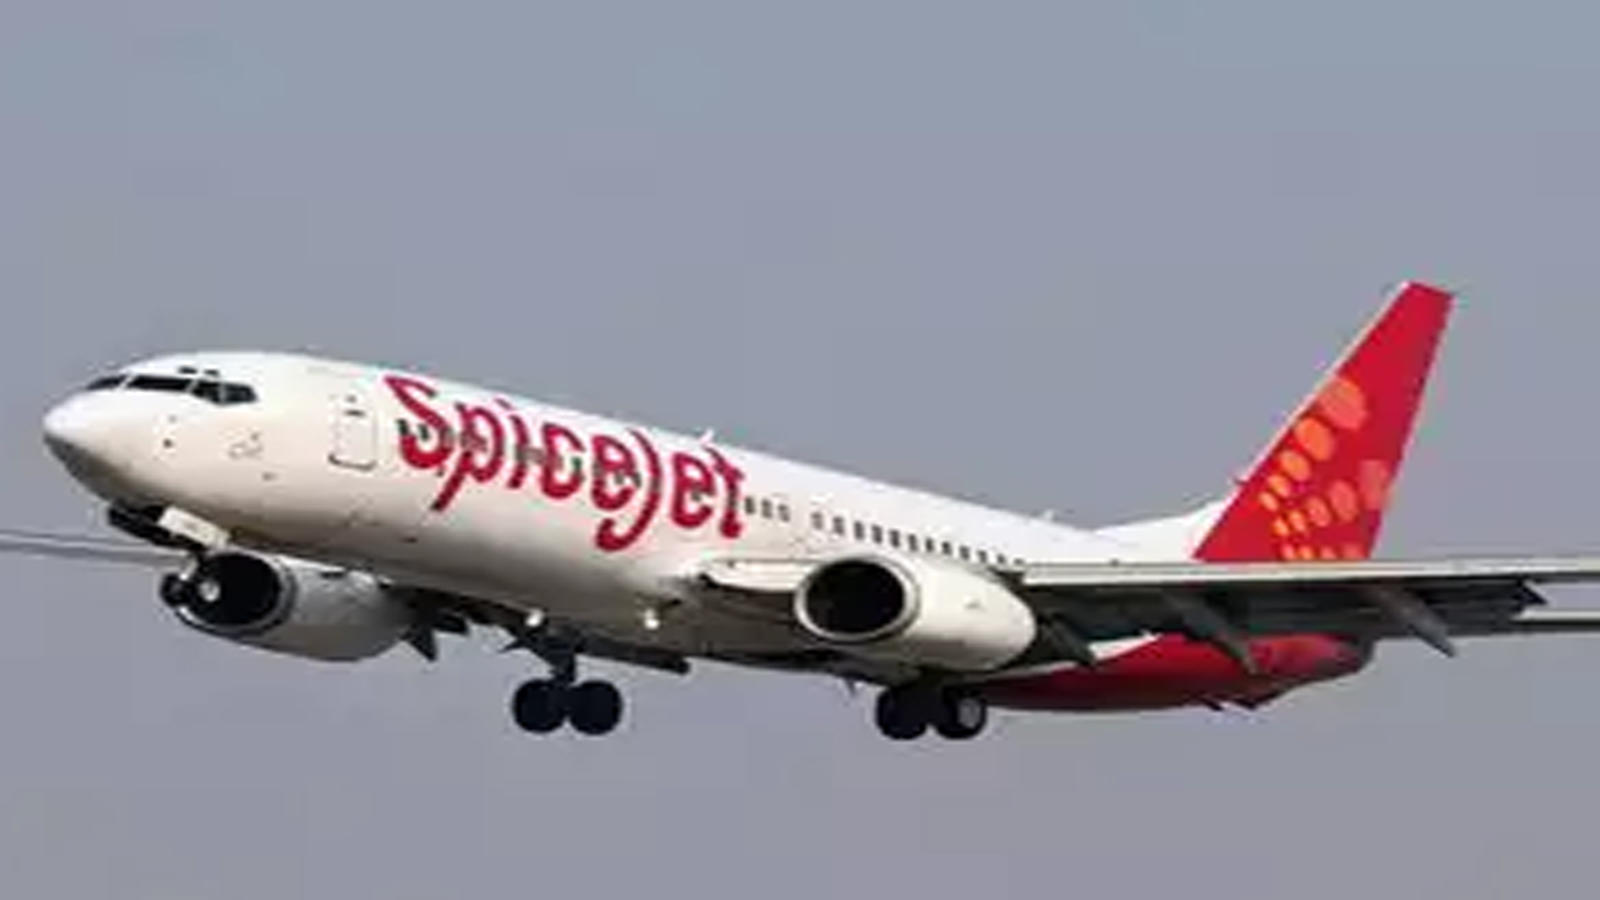 Spicejet Ltd : Abu Dhabi Investment Authority Bought ₹62 Share; Total Investment 1060 Crore